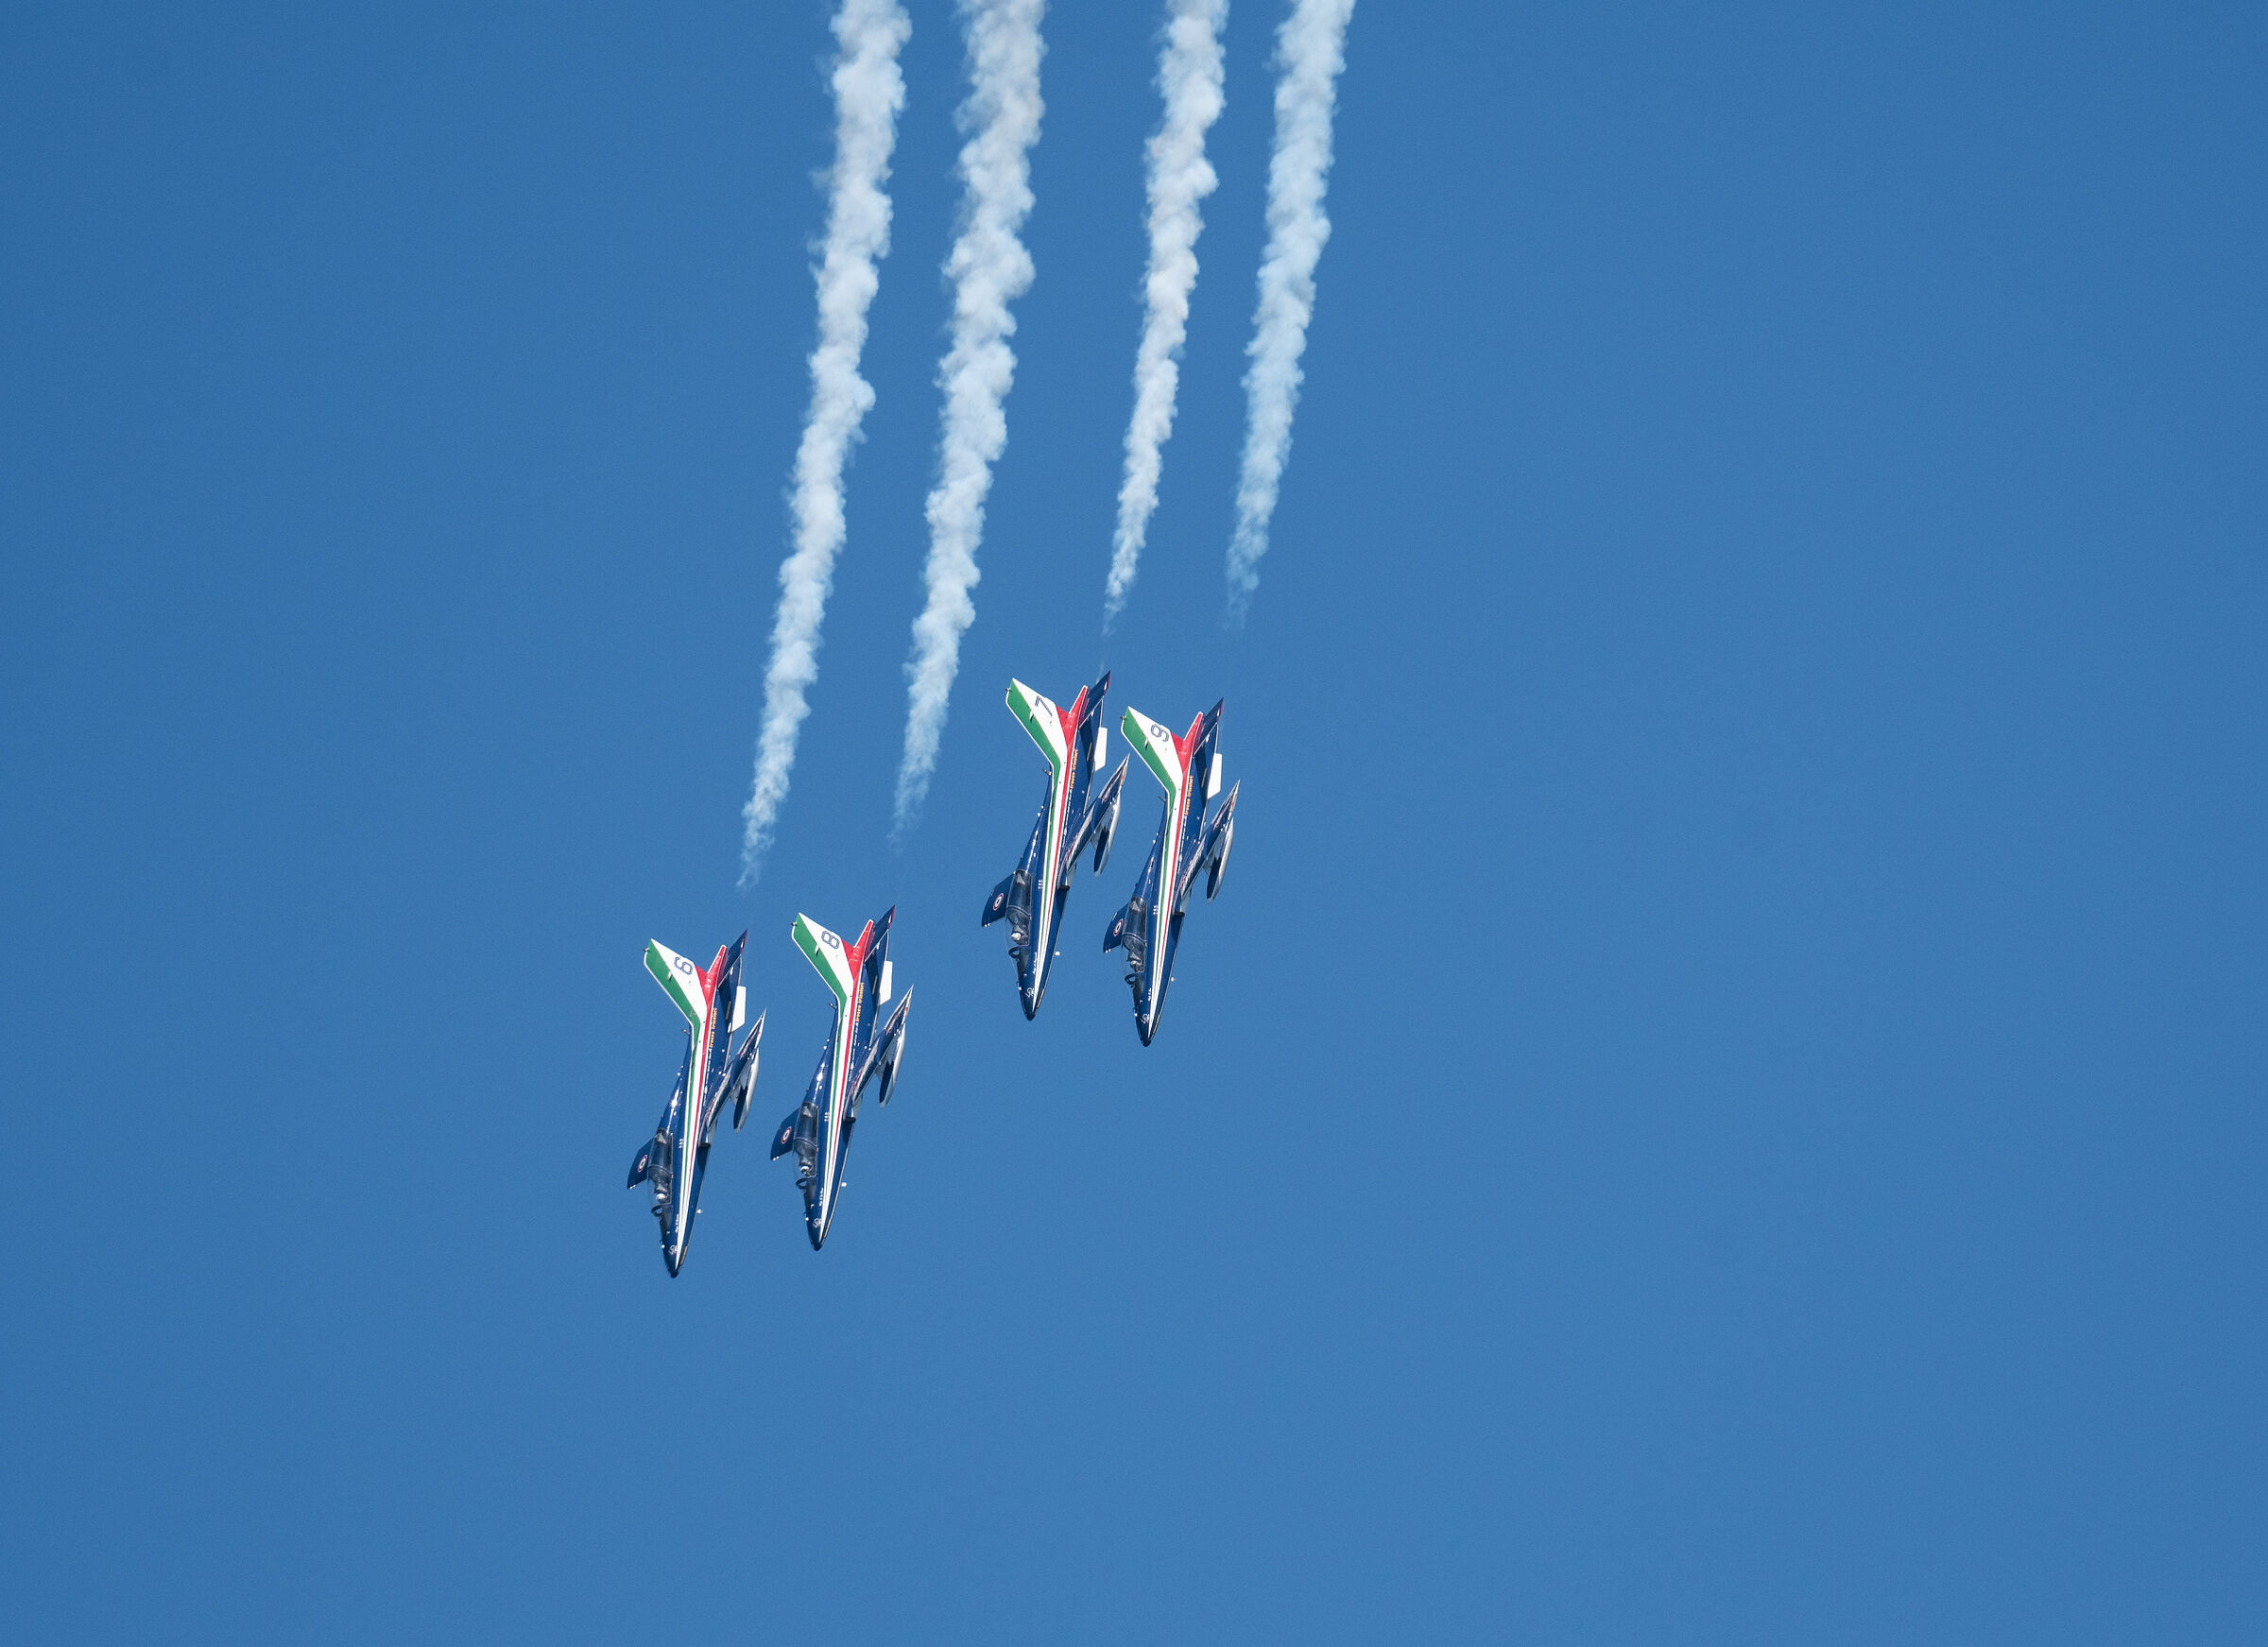 Airshow in Arona July 2022...